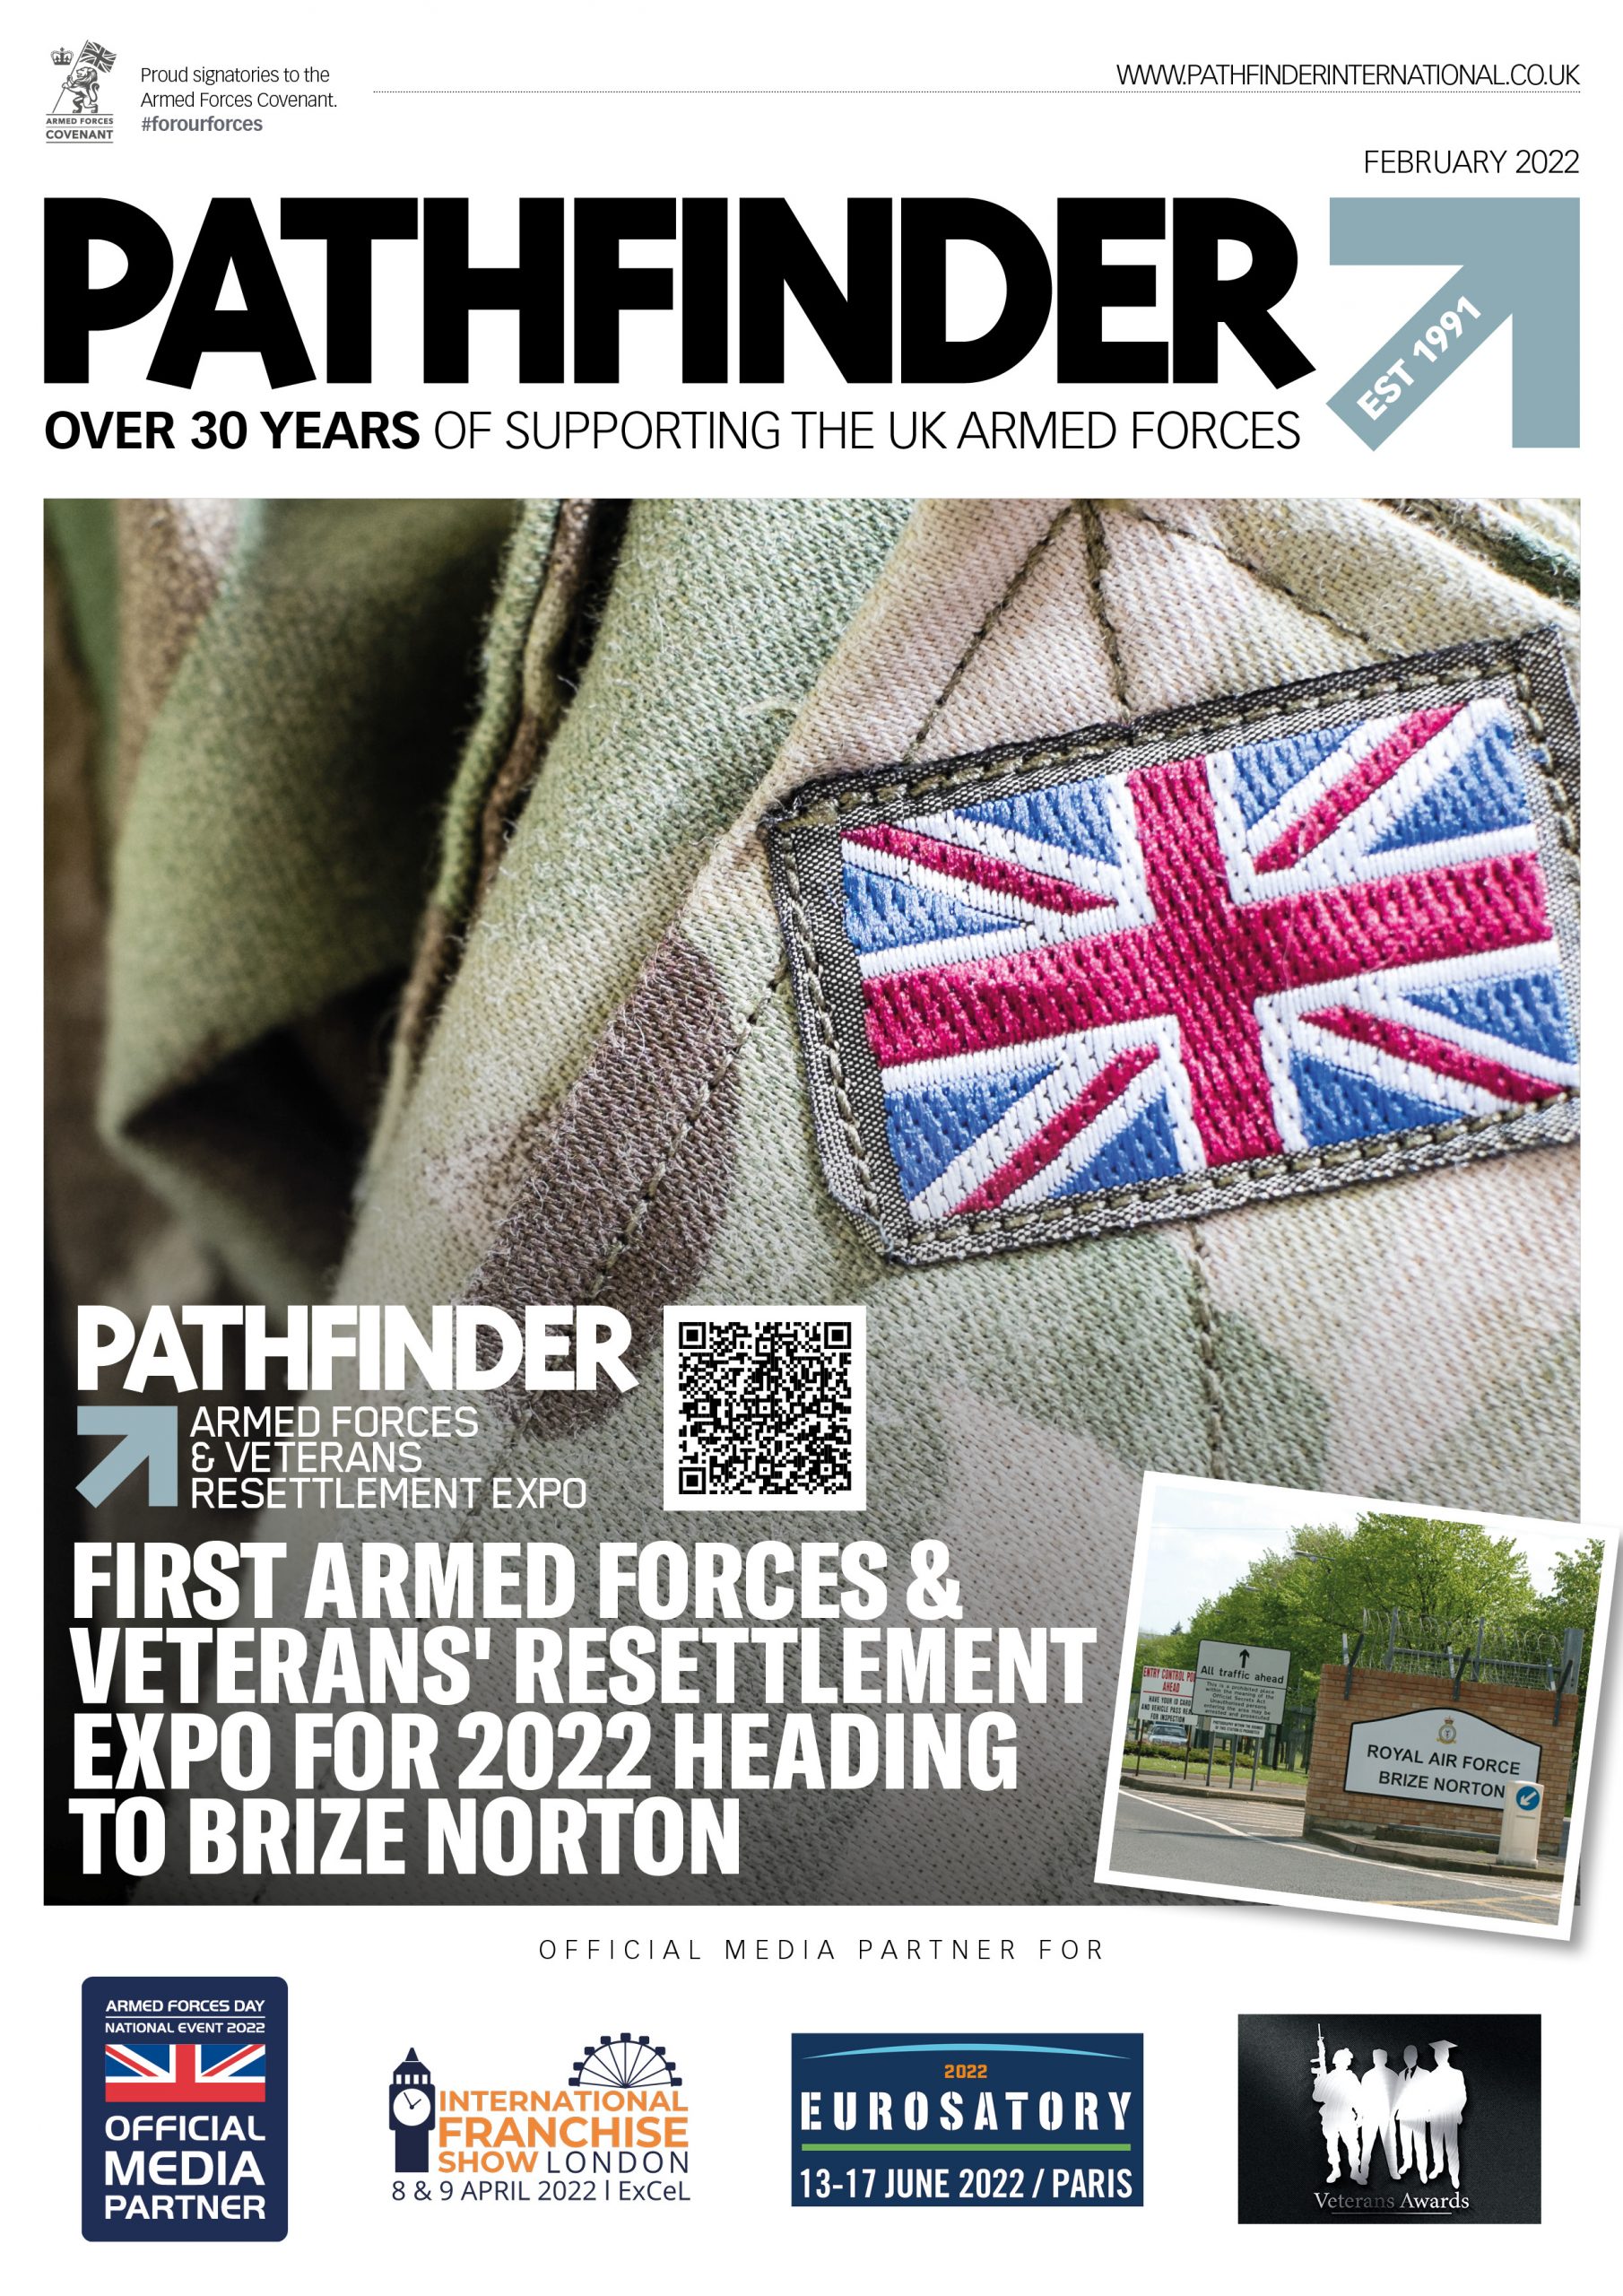 Pathfinder Announces First Expo For 2022 Near RAF Brize Norton